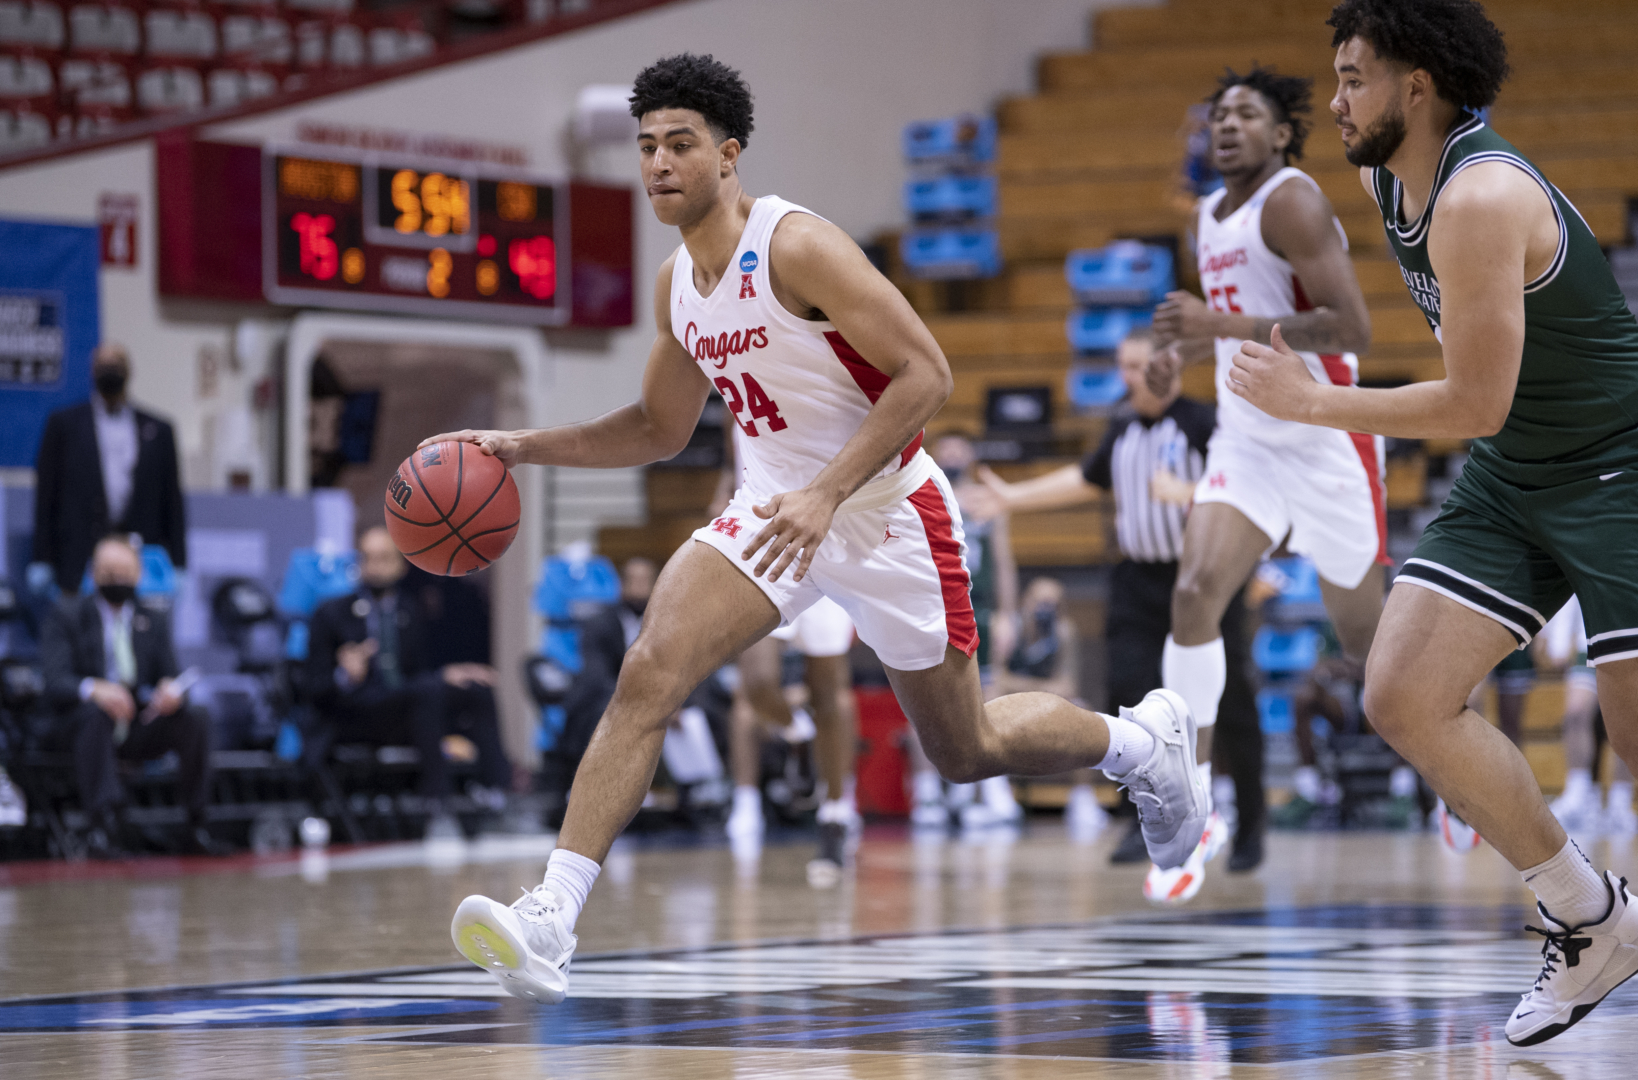 BLOOMINGTON, IN - MARCH 19: UH guard Quentin Grimes (24) during the first round of the 2021 NCAA Division I Men’s Basketball Tournament held at Simon Skjodt Assembly Hall on March 19, 2021 in Bloomington, Indiana. (Photo by Ben Solomon/NCAA Photos via Getty Images)